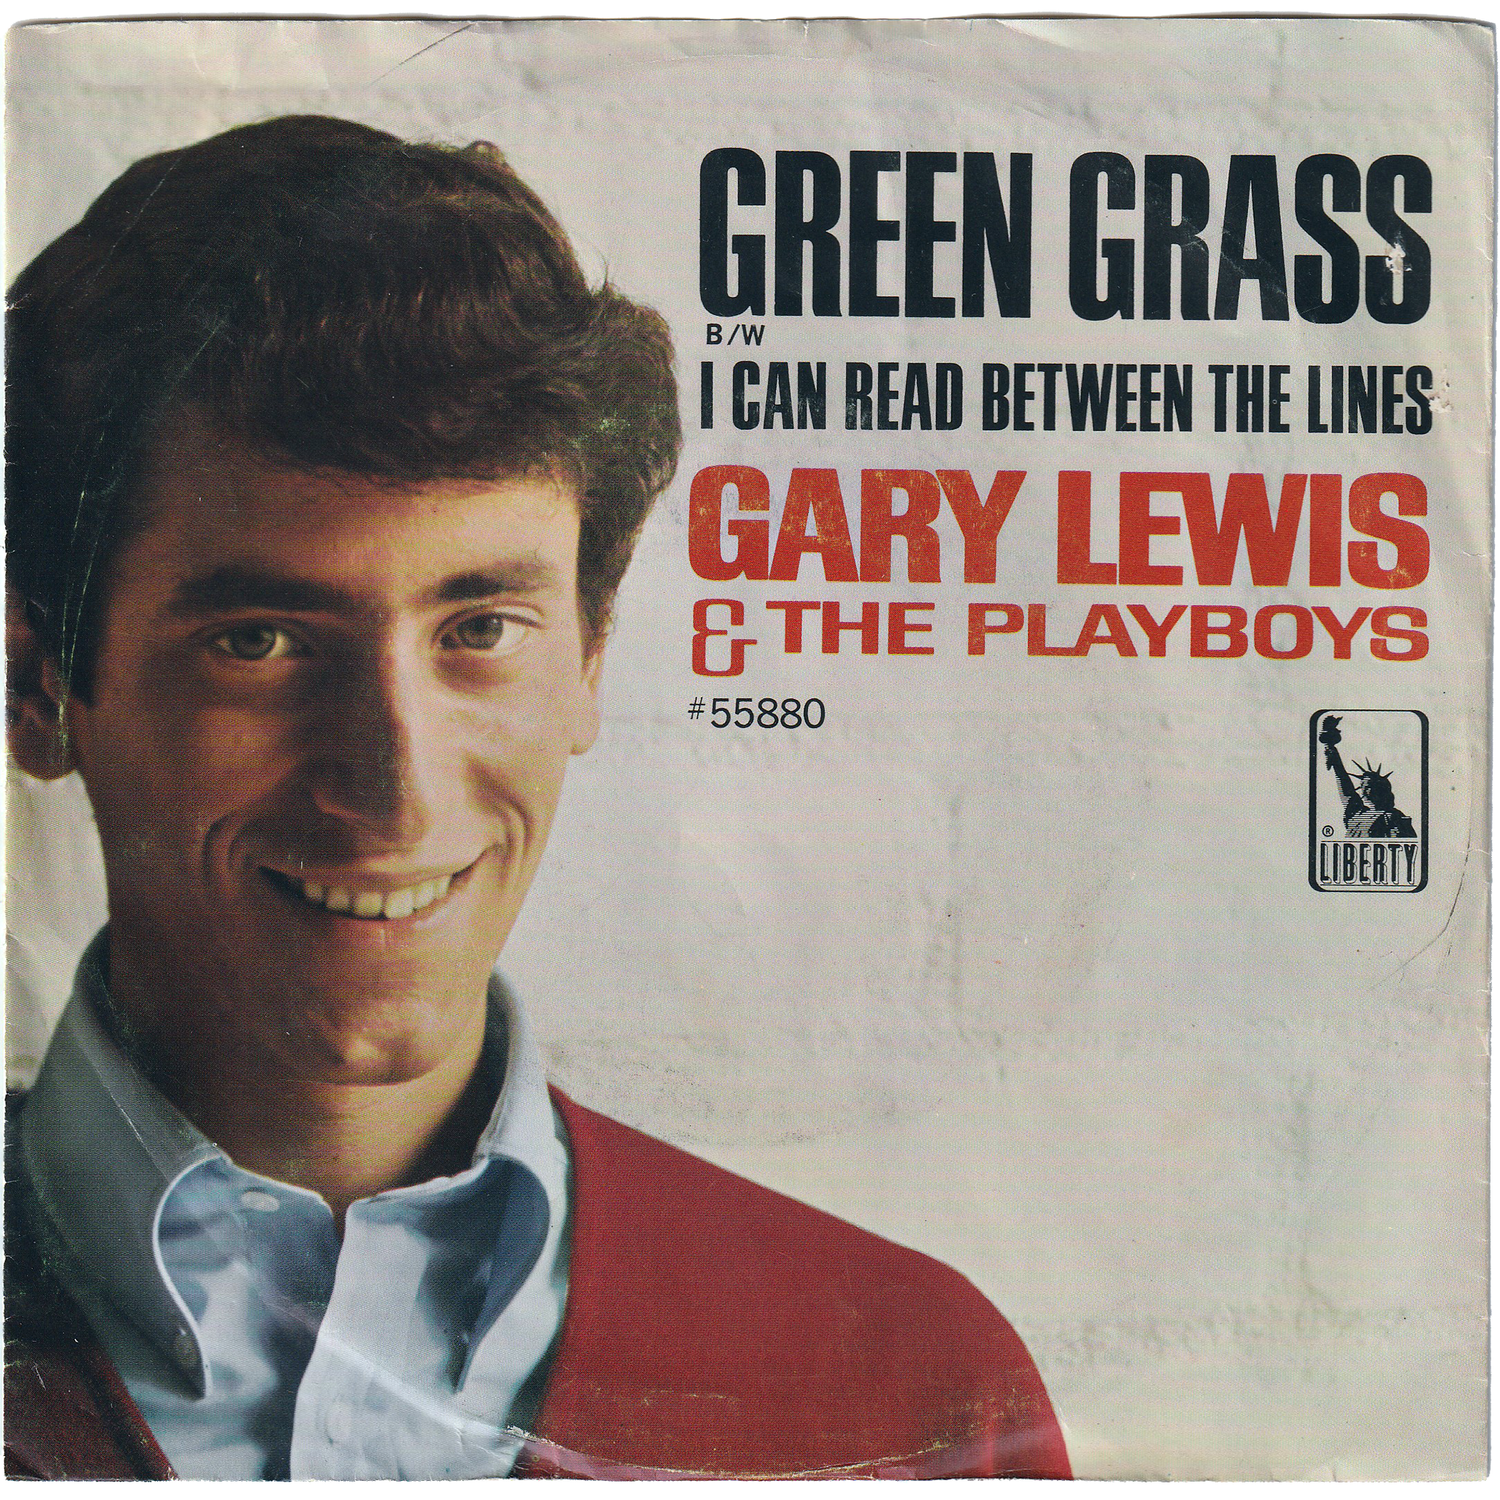 Gary Lewis  The Playboys Green Grass I Can Read Between The Lines –  NIGHT BEAT RECORDS